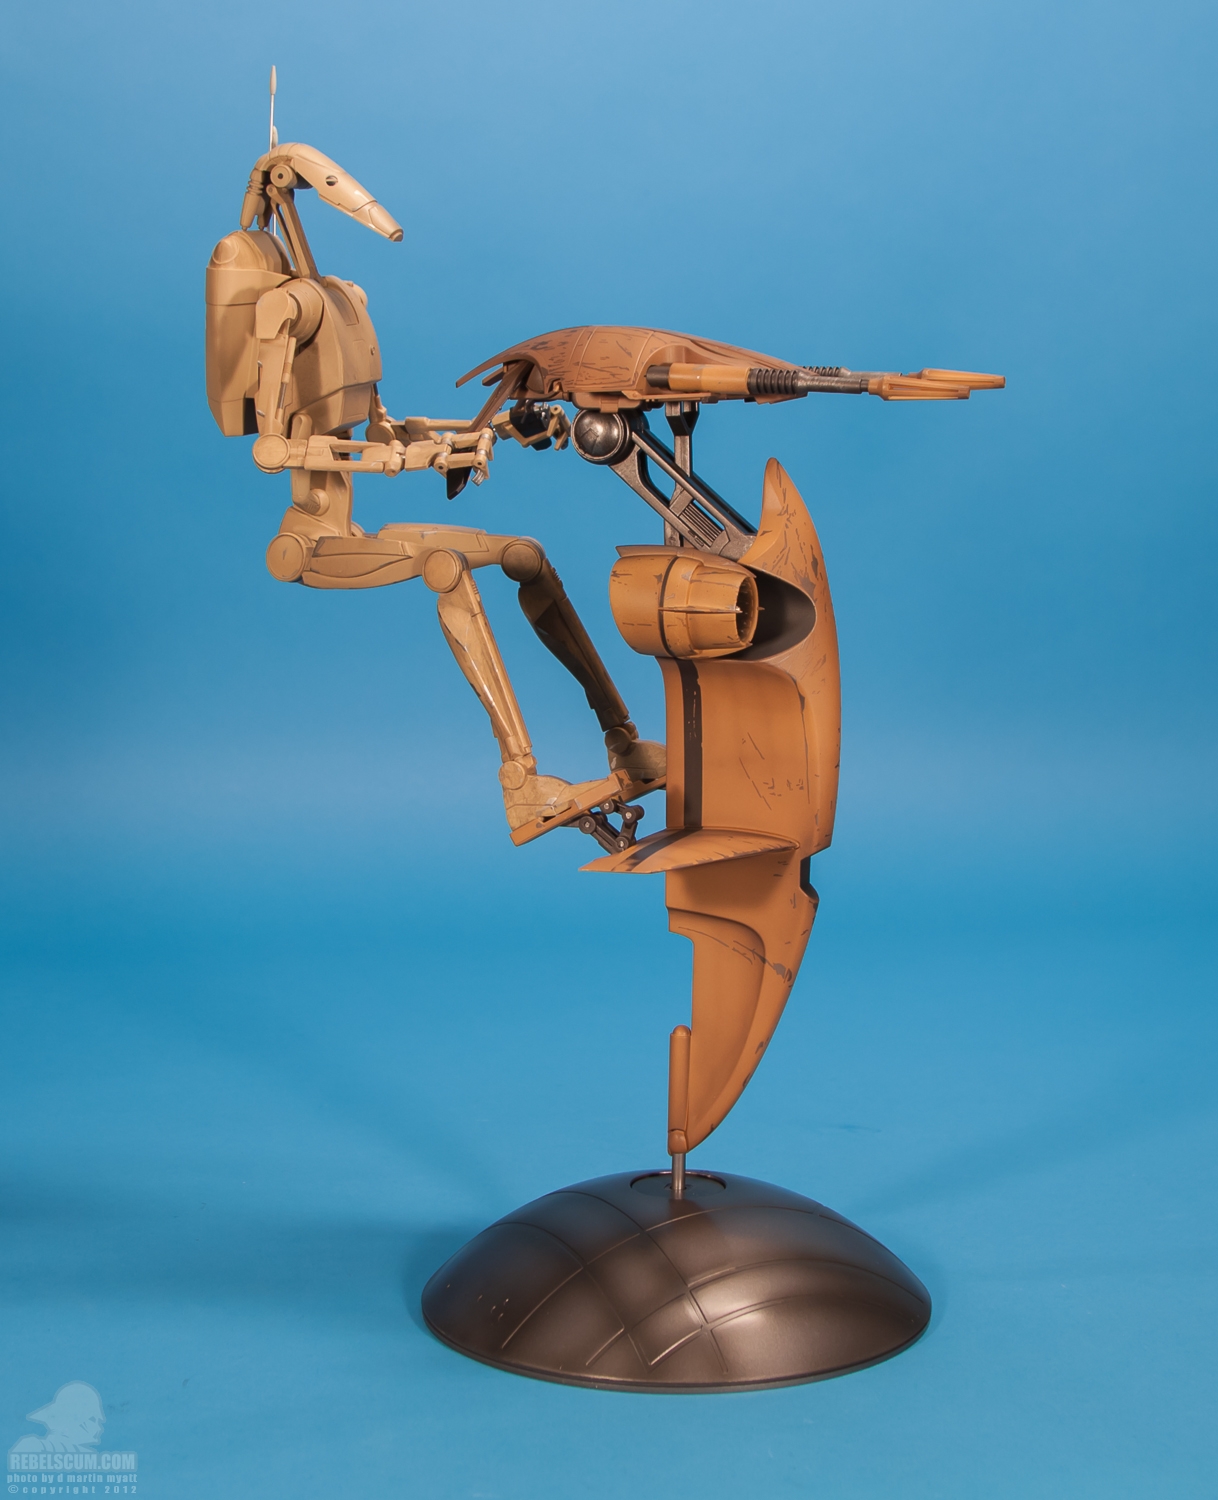 STAP_Battle_Droid_Star_Wars_Sideshow_Collectibles-18.jpg